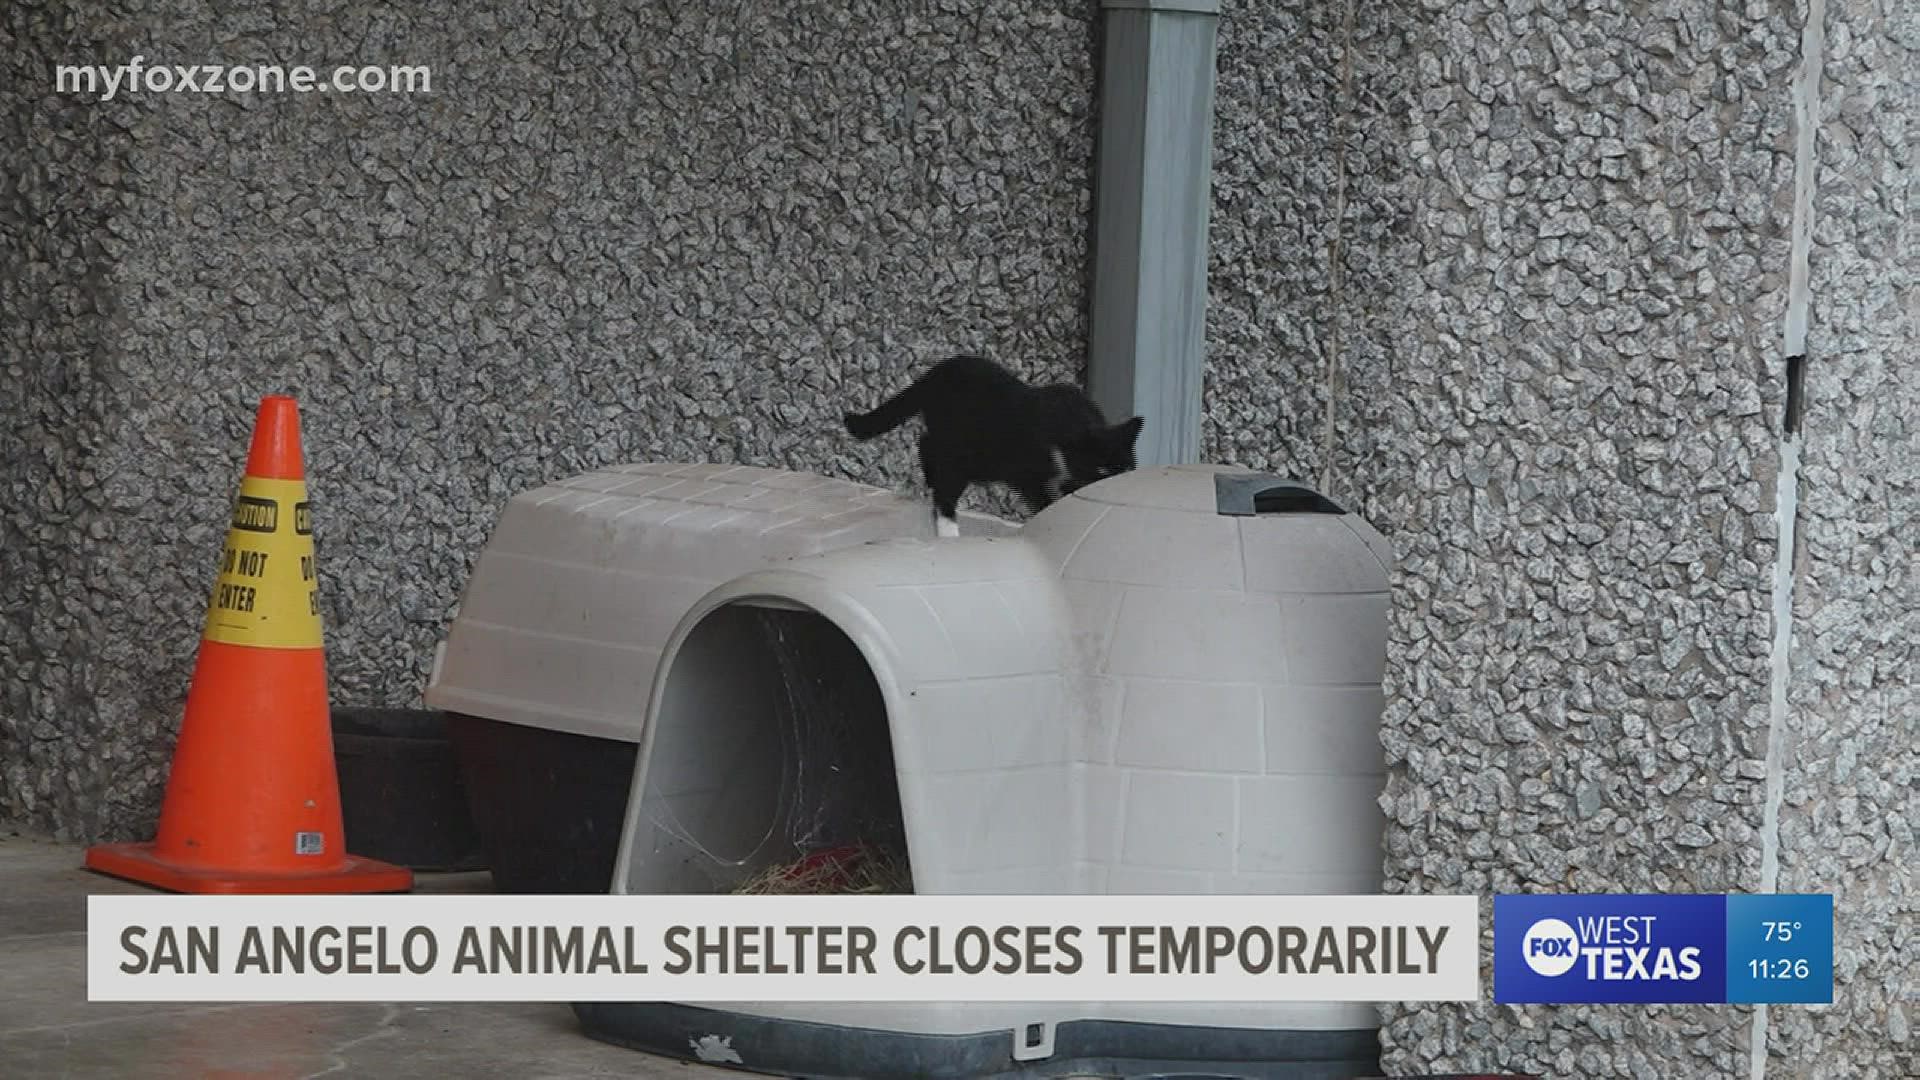 San Angelo Animal Shelter announces plan for temporary closure because of roach infestation and how it plans to fix the problem.